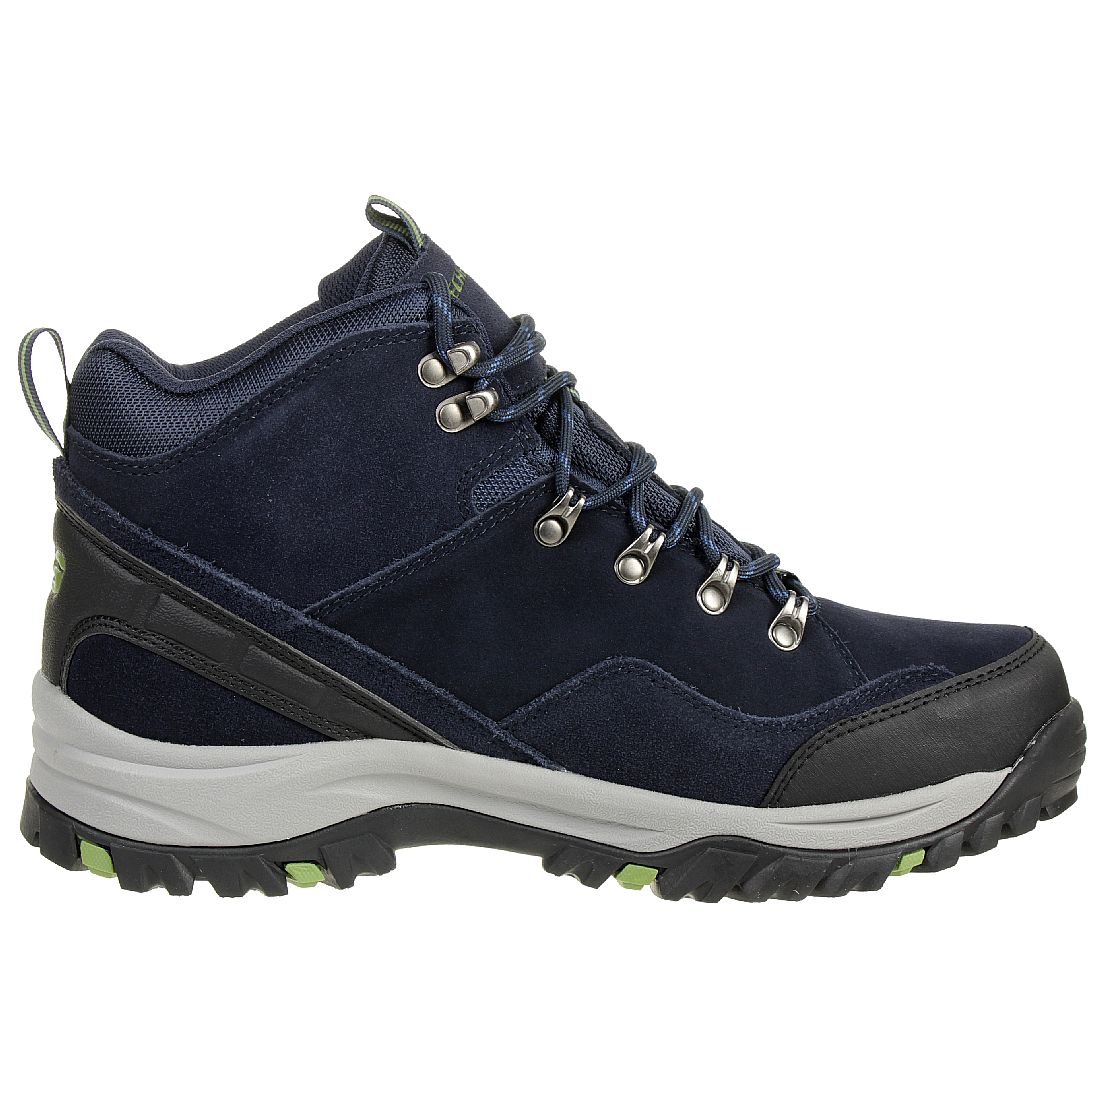 Skechers RELMENT PELMO Stiefel Outdoor Schuhe Waterproof RELAXED FIT NVY